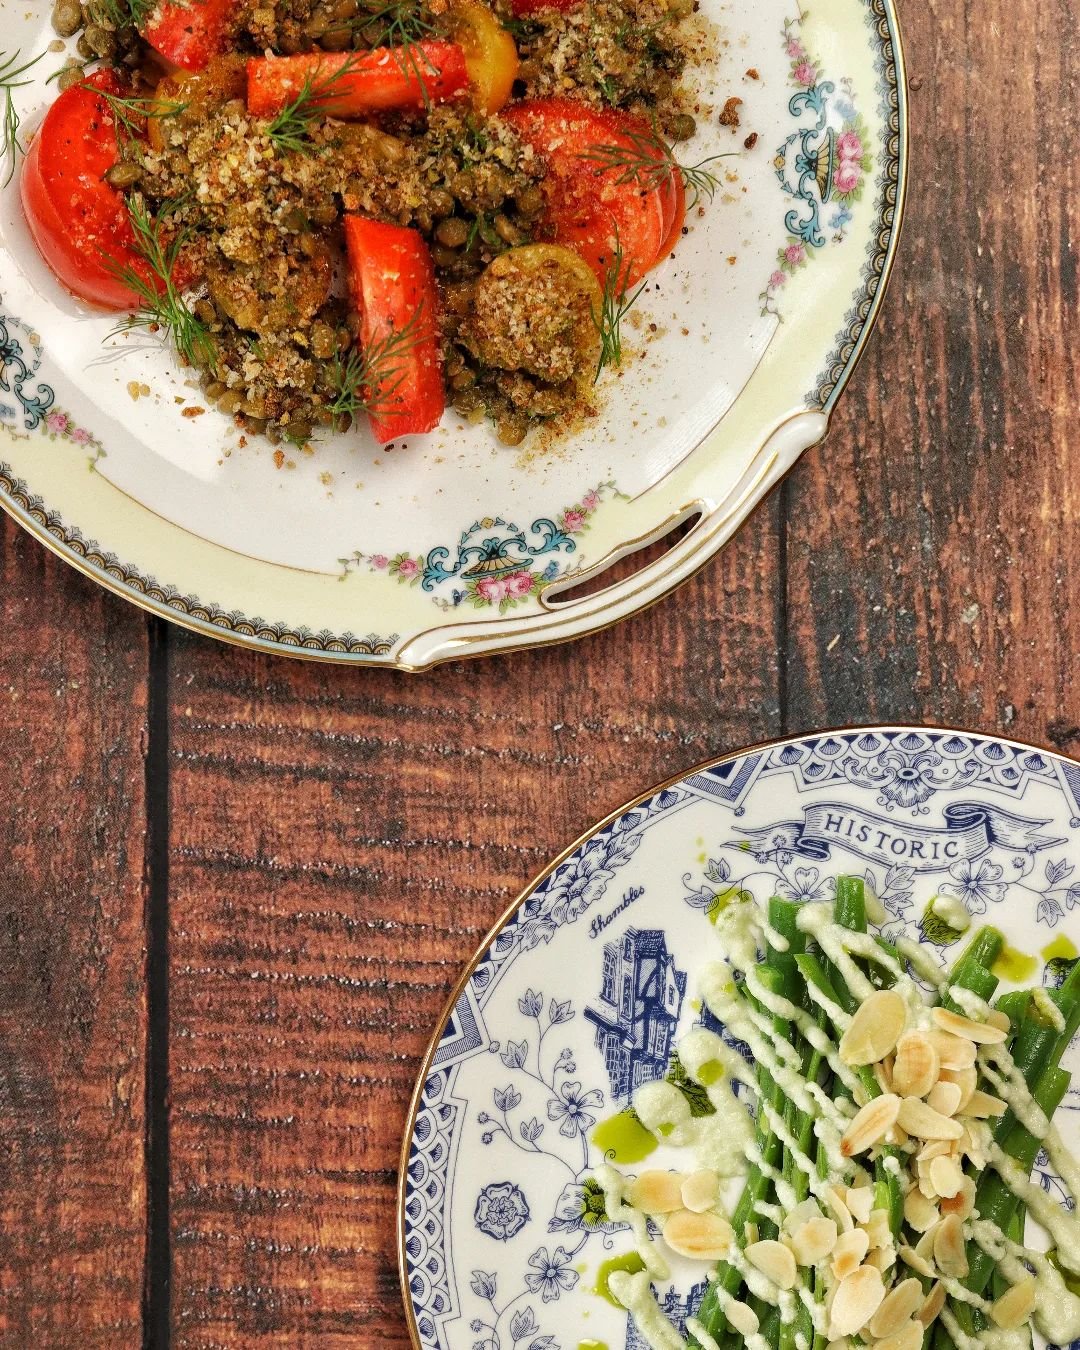 Tomato and lentil salad with dill and pangrattato 🍅 Vs green bean salad with ajo blanco 🧄 order one (or both) alongside other delicious small plates at our June pop-up at @thesqueezecafe - bookings open now at the link on bio 🧡